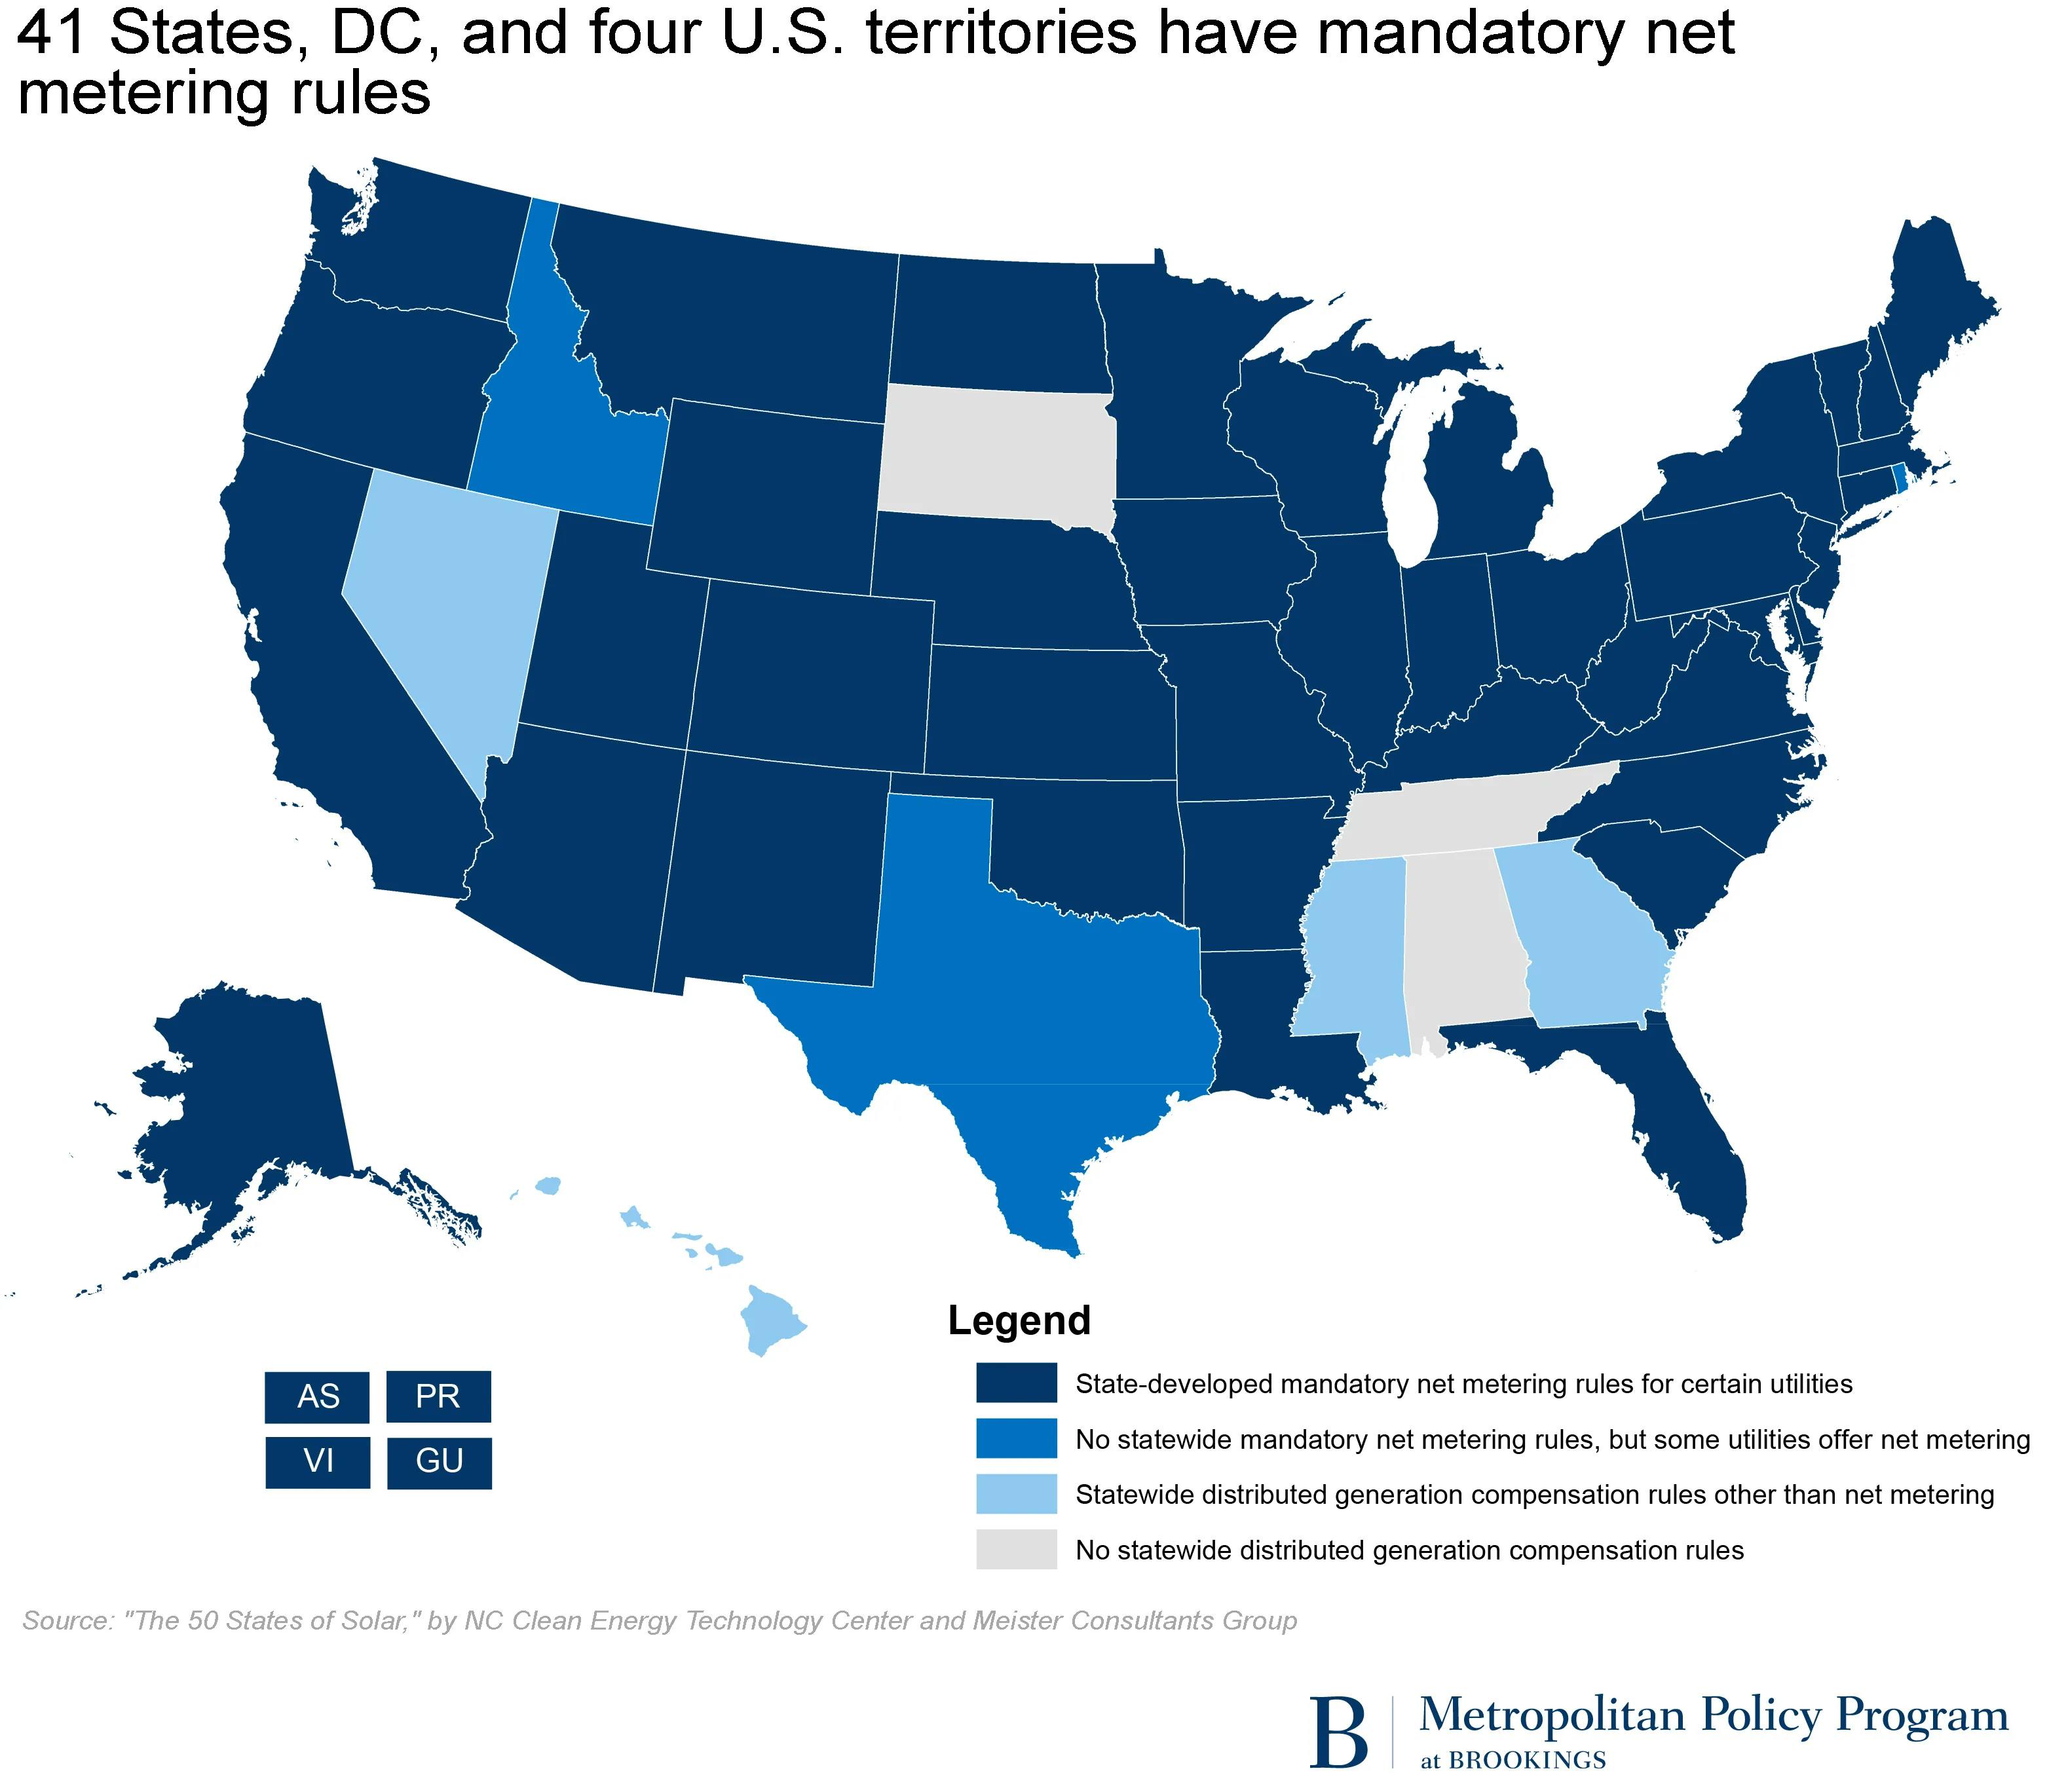 A map of the U.S. that illustrates which states have mandatory net metering rules for residential solar